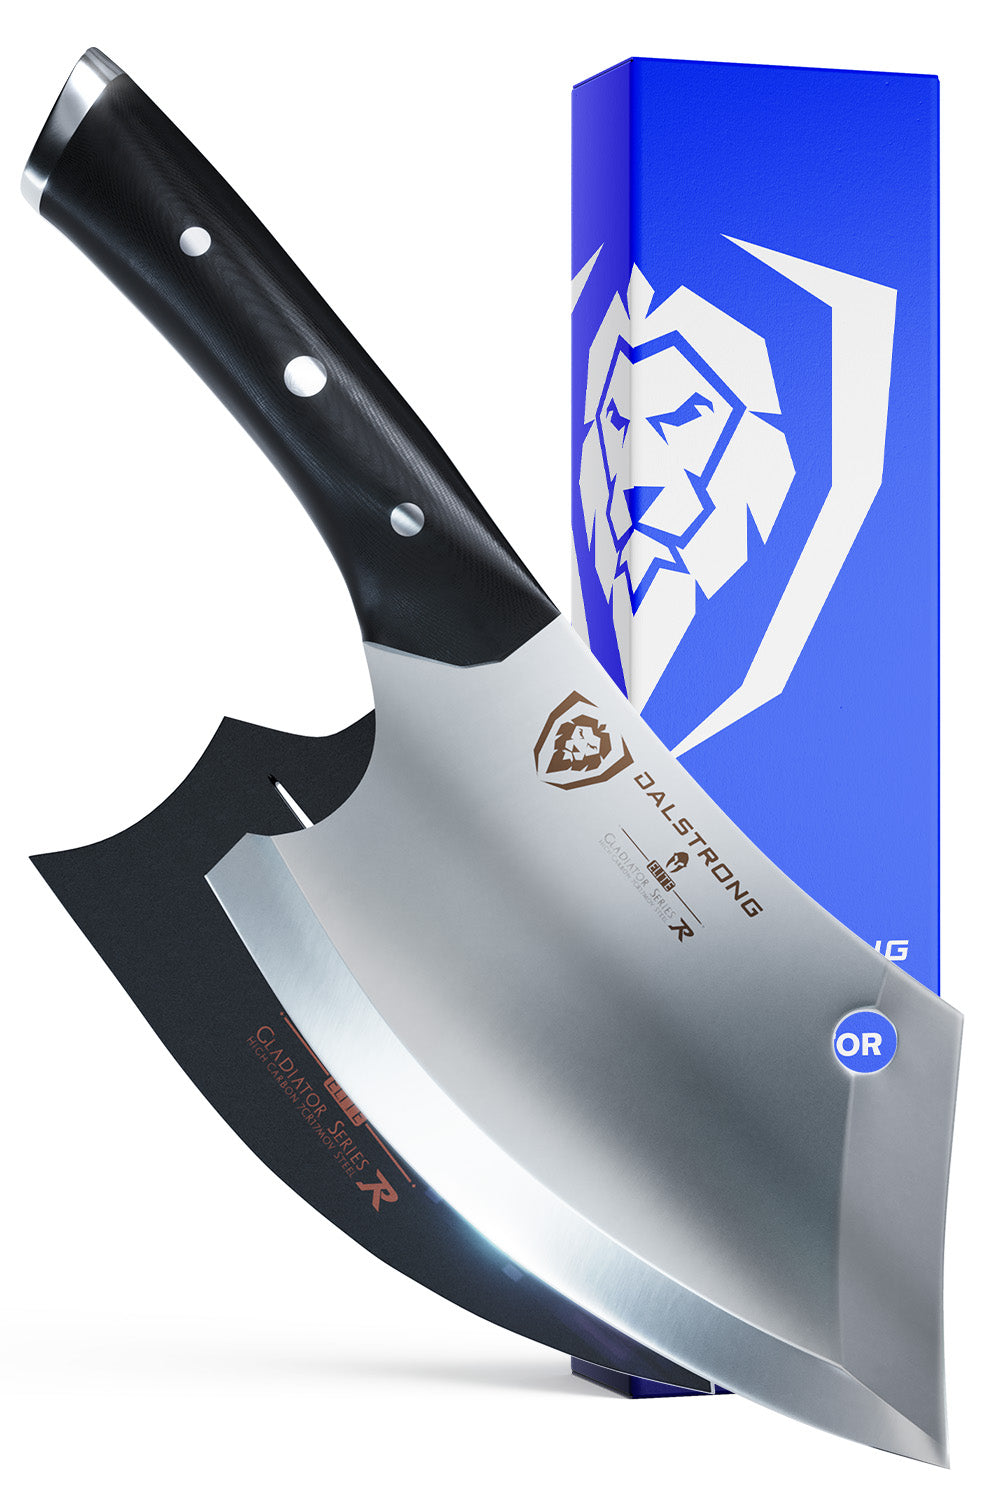 Rocking Cleaver Knife 6.5" | Gladiator Series R | NSF Certified | Dalstrong ©